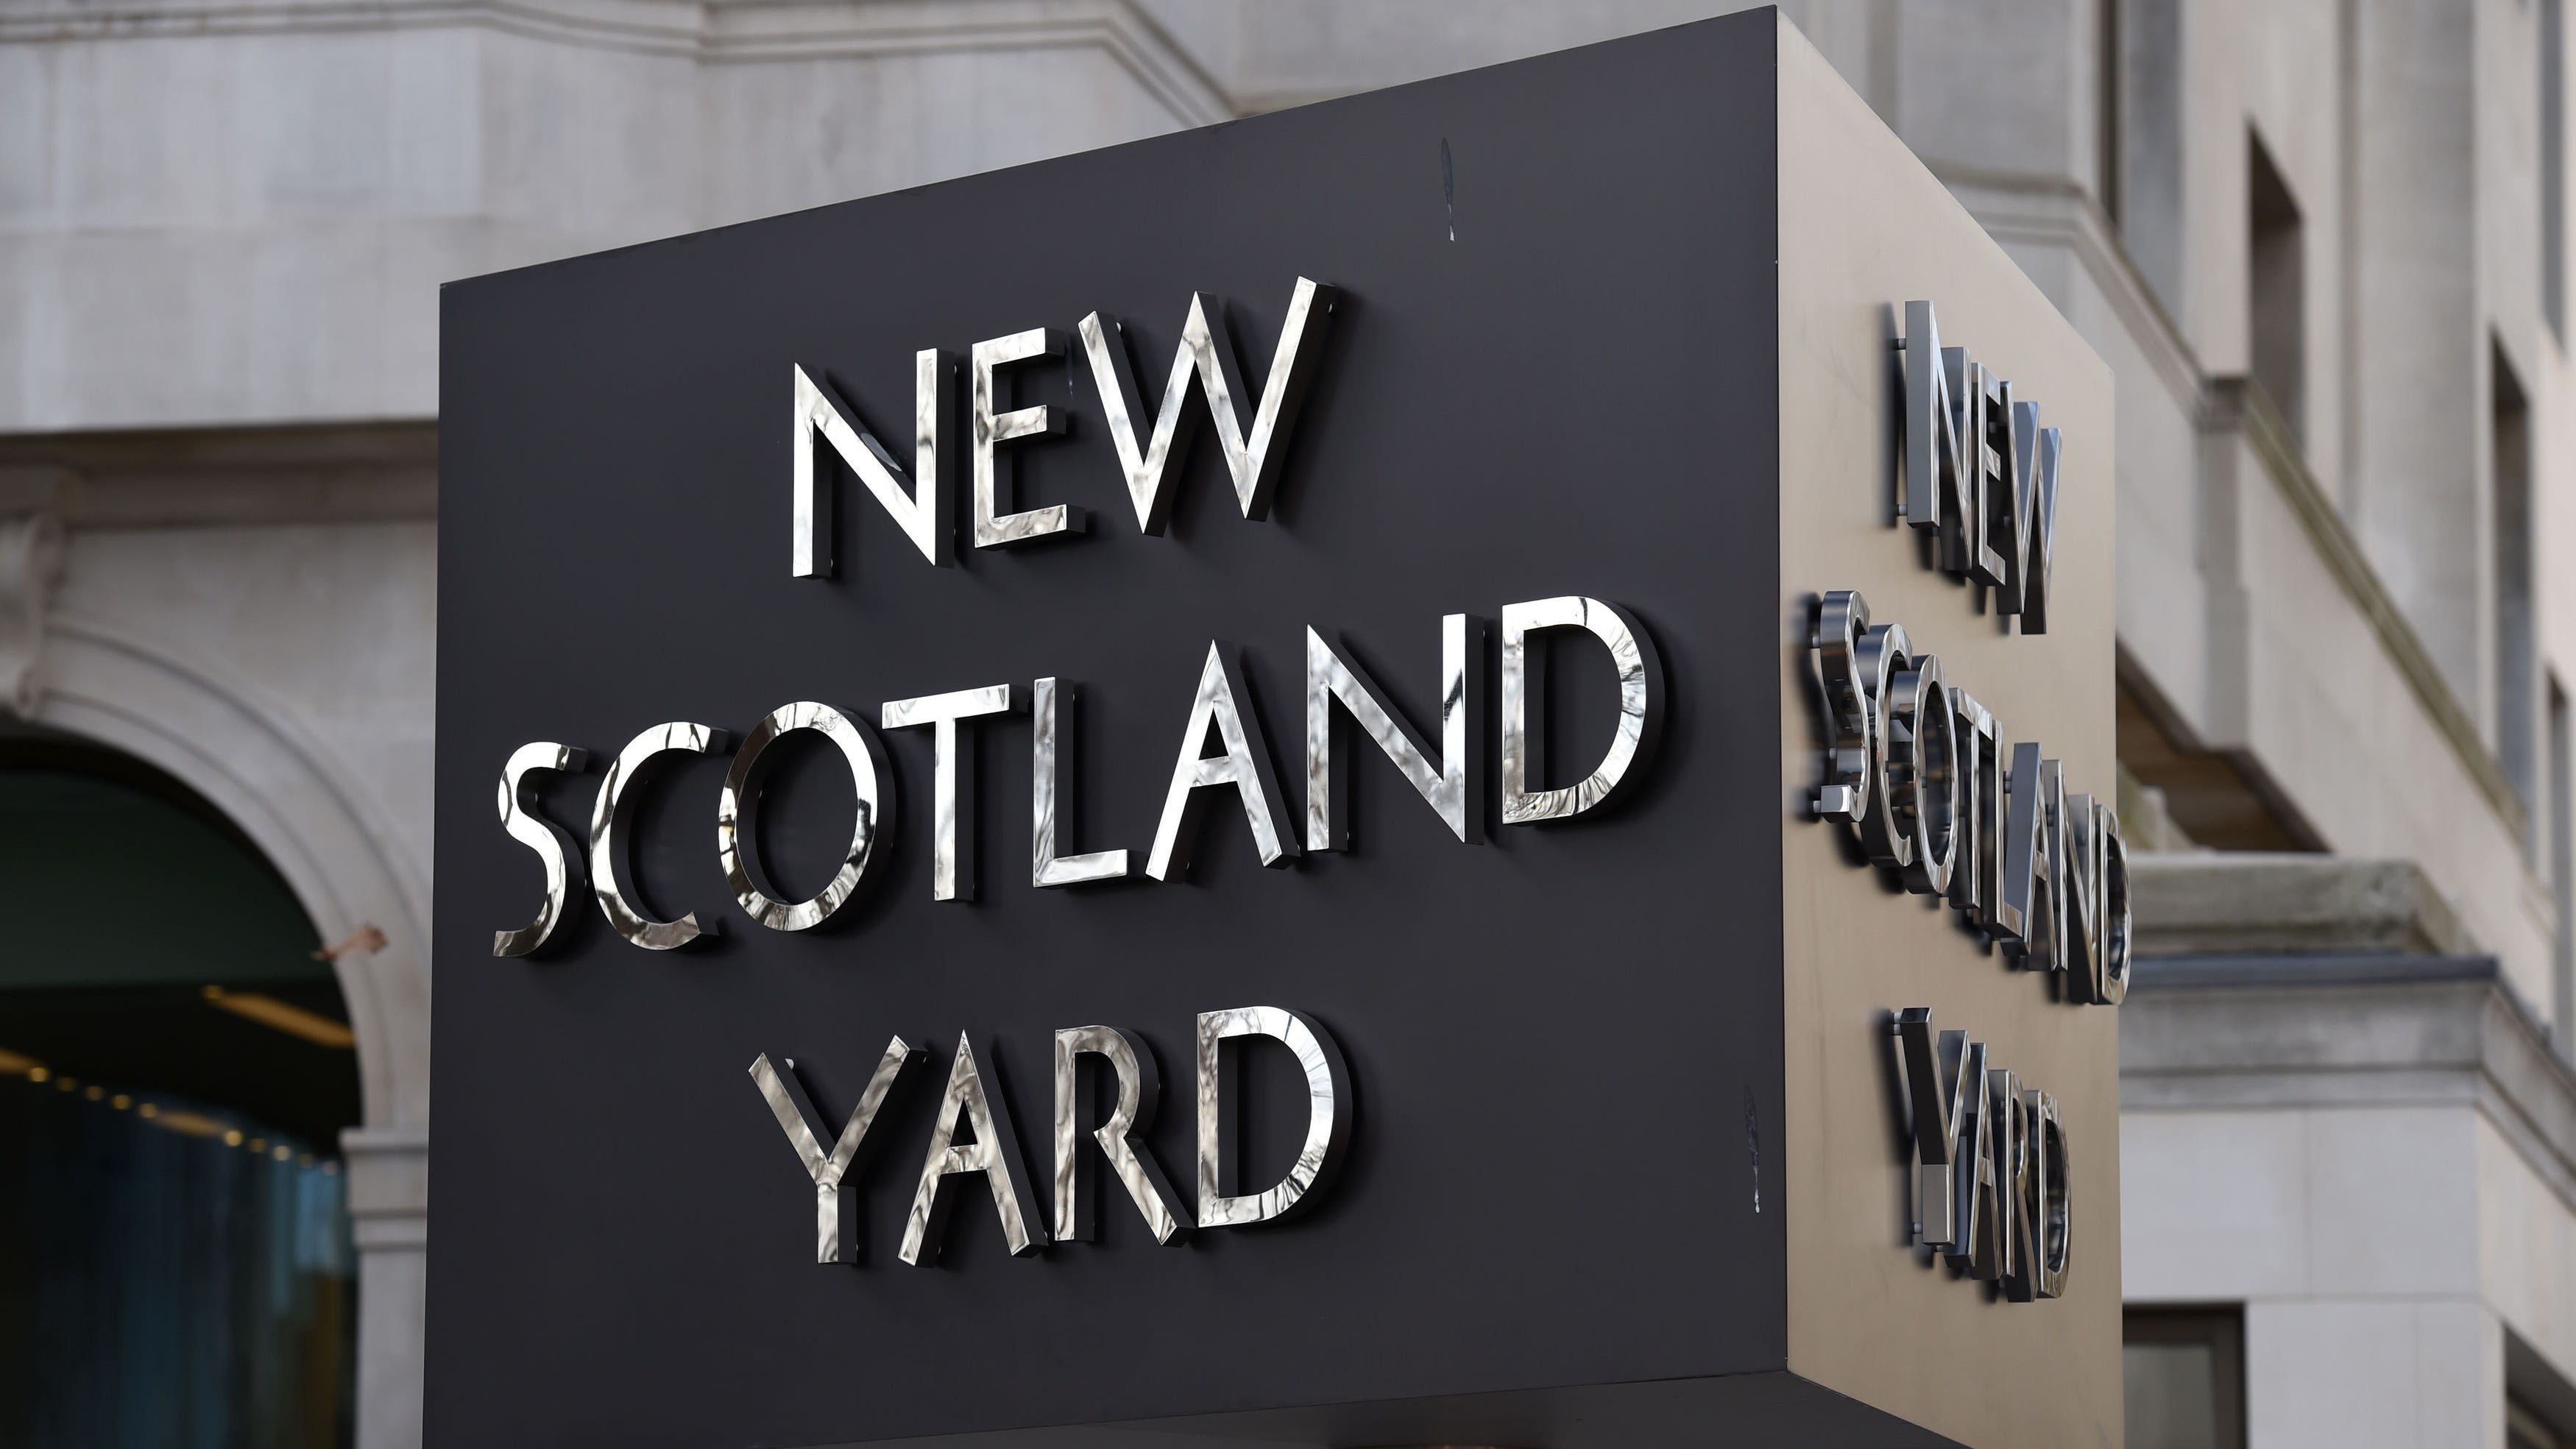 Man arrested after fatal stabbing during fight in east London